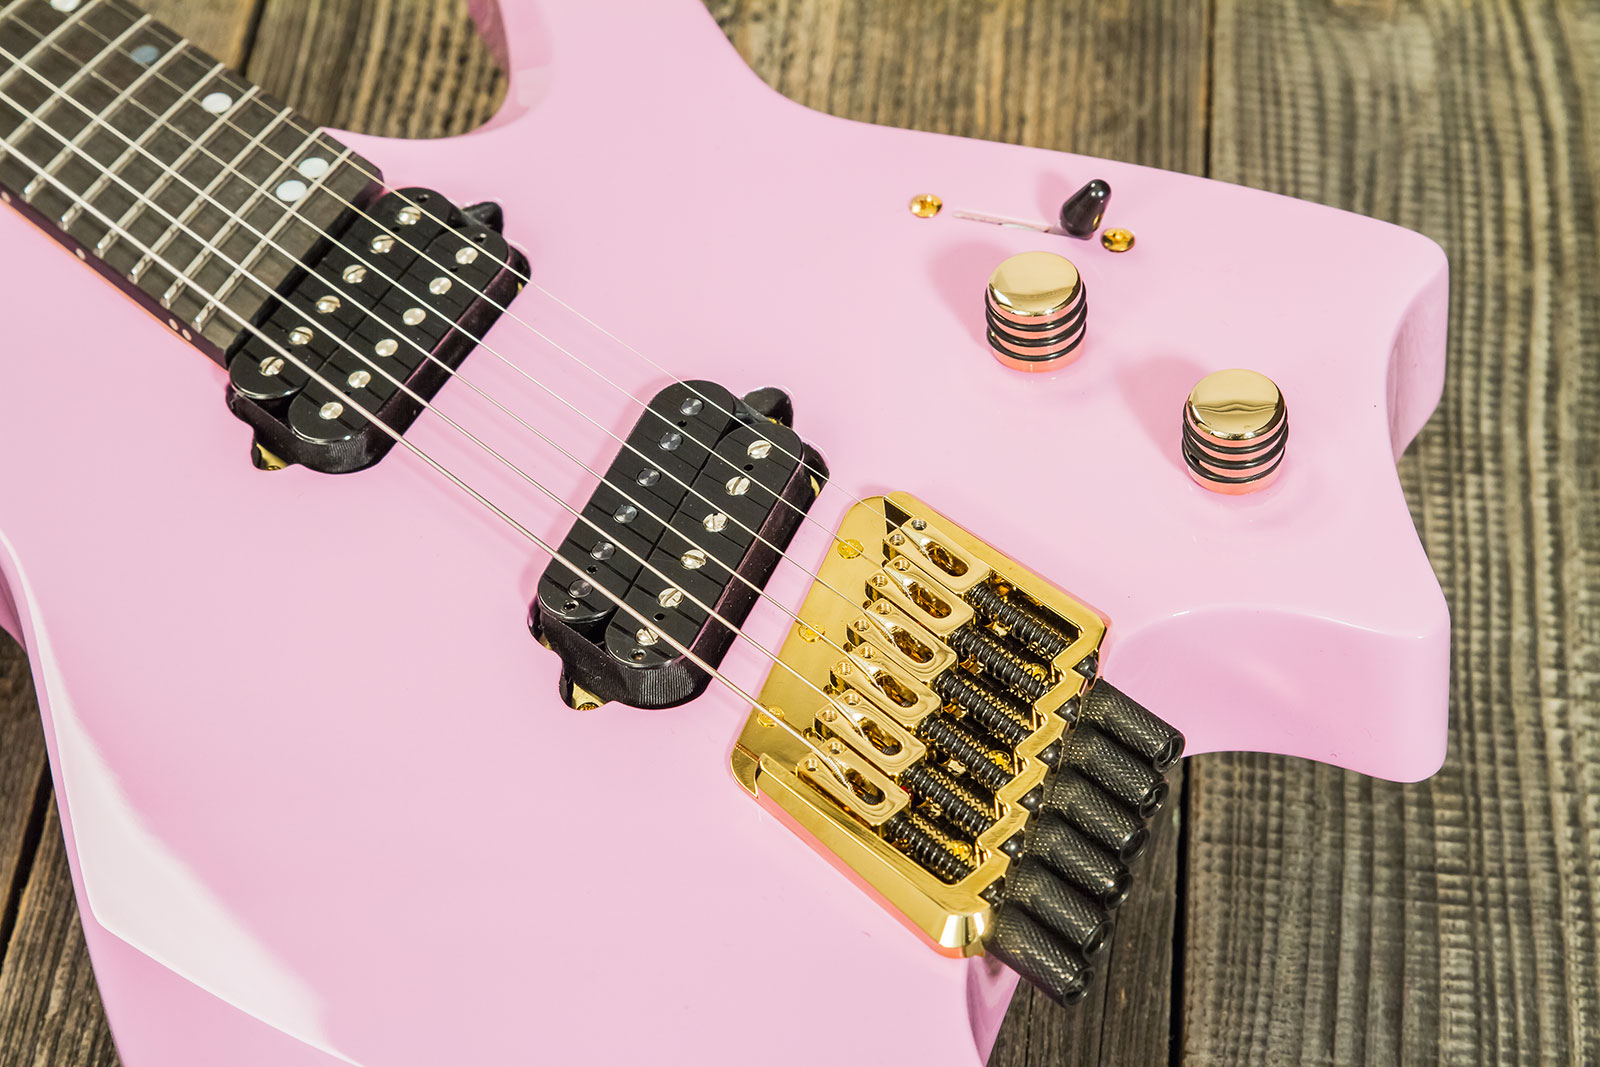 Ormsby Goliath Headless Gtr Run 14c Multiscale 2h Ht Eb - Shell Pink - Guitare Électrique Multi-scale - Variation 3